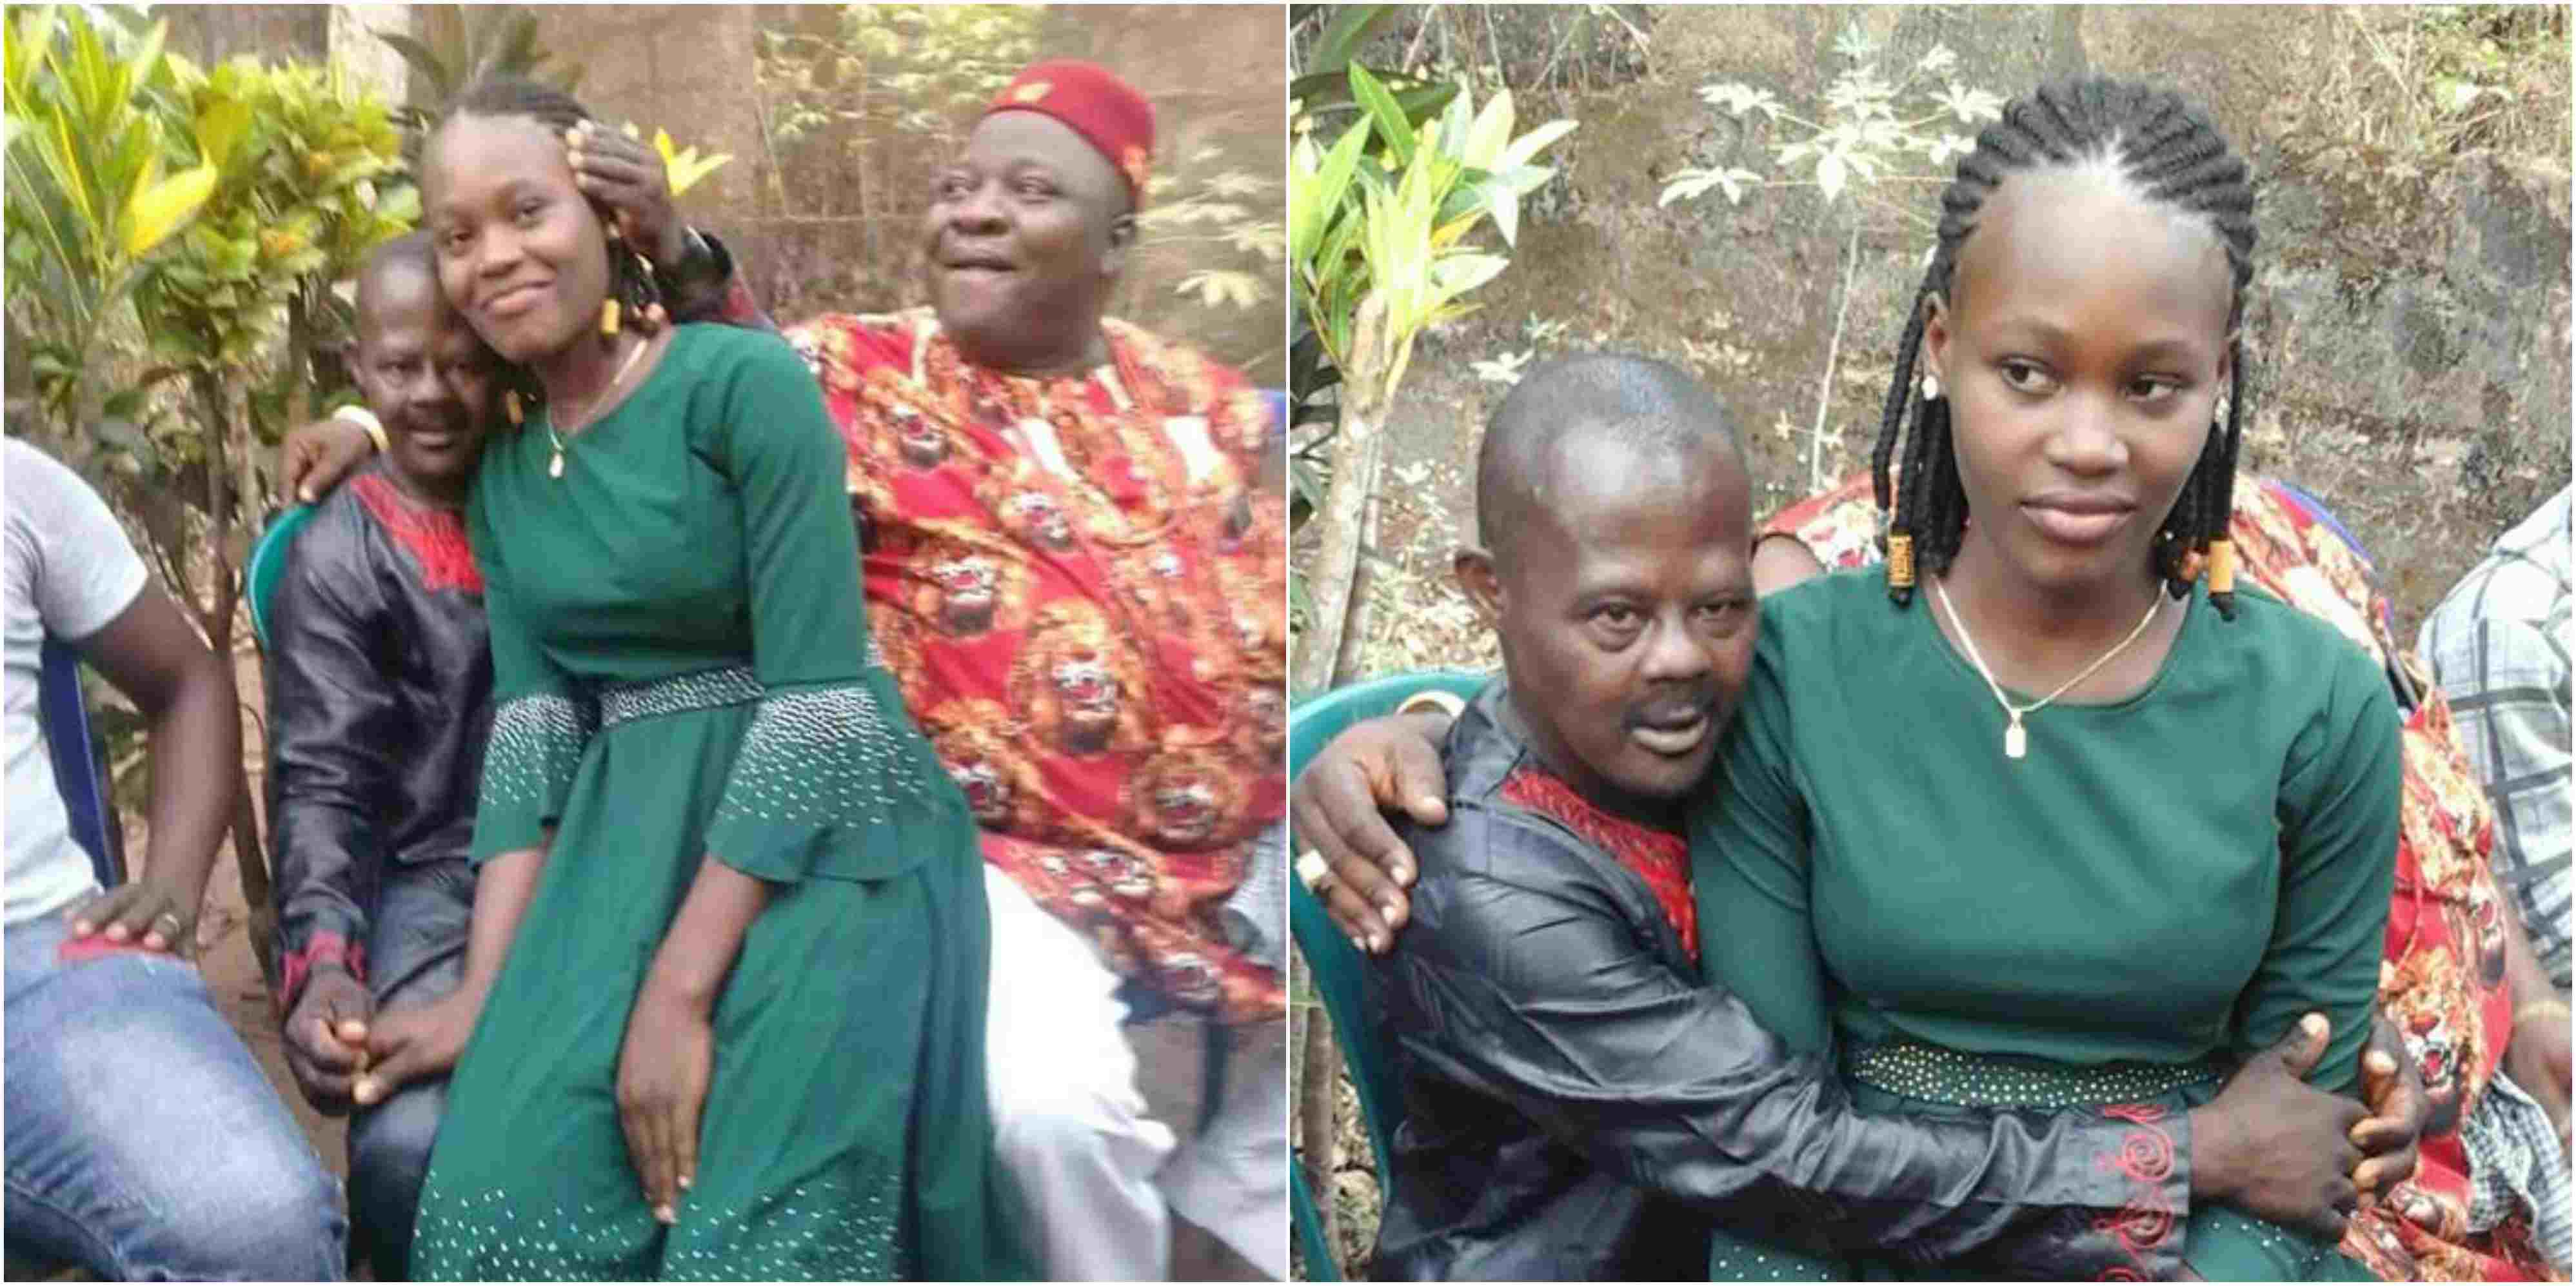 teenager marries 56-year-old man in Anambra